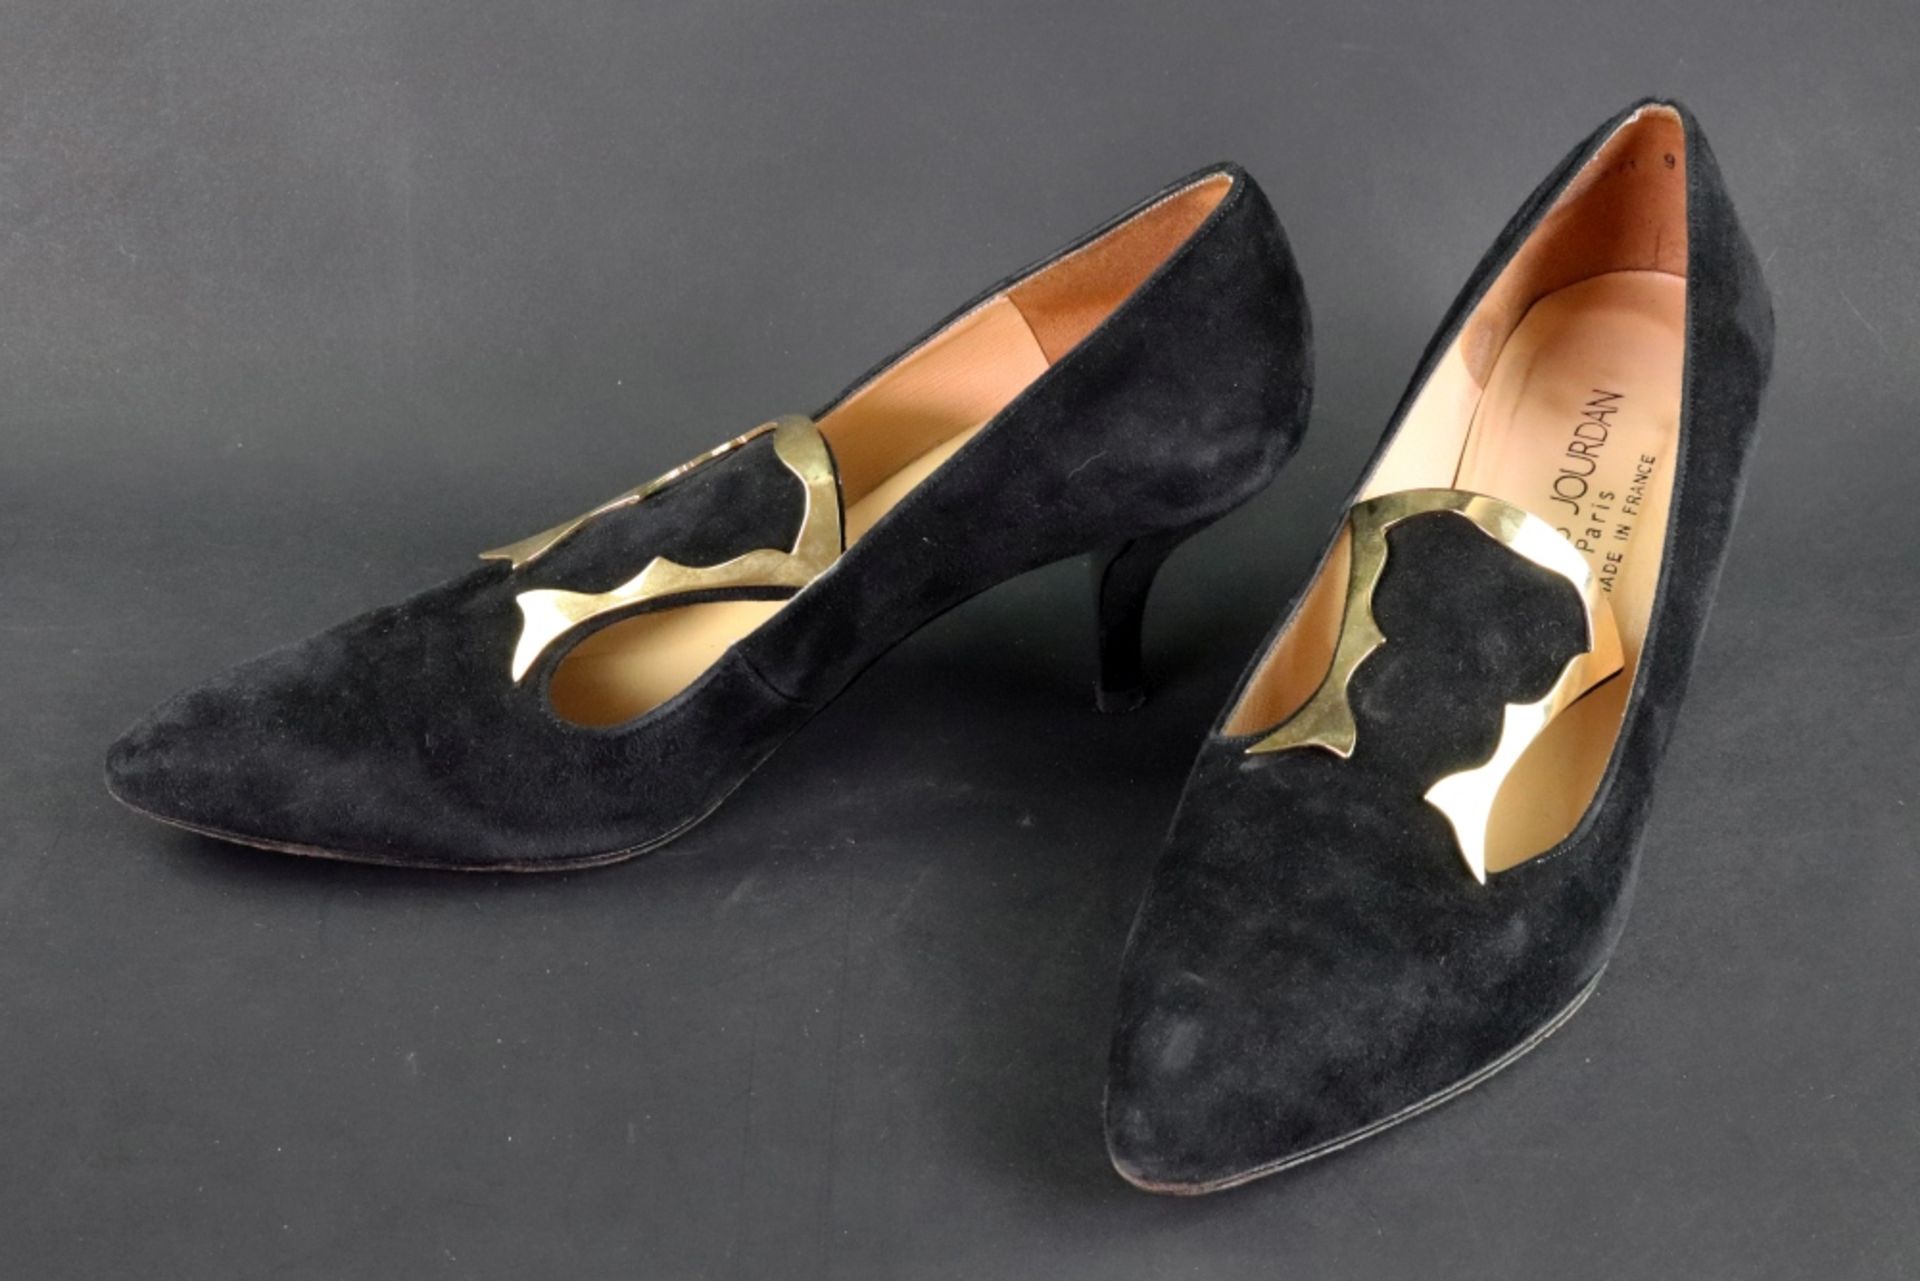 A pair of Charles Jourdan black suede and leather high heel shoes, - Image 3 of 4